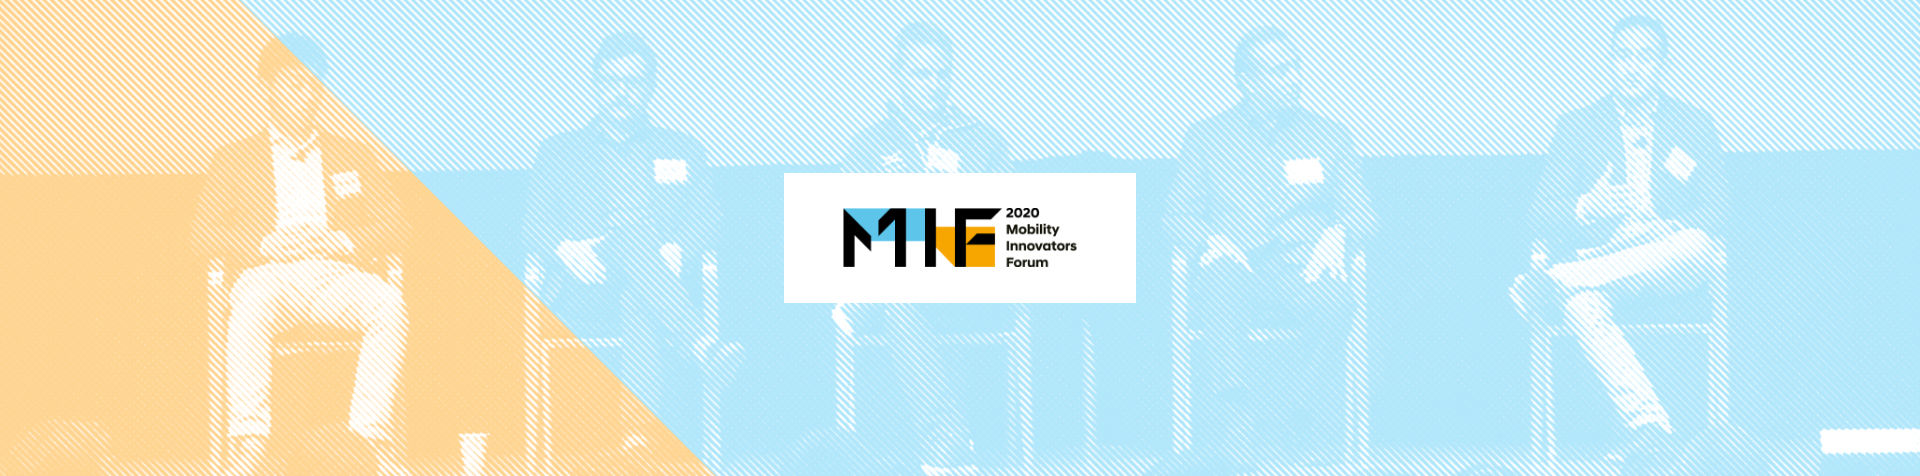 Human-Centred Mobility: From vision to reality